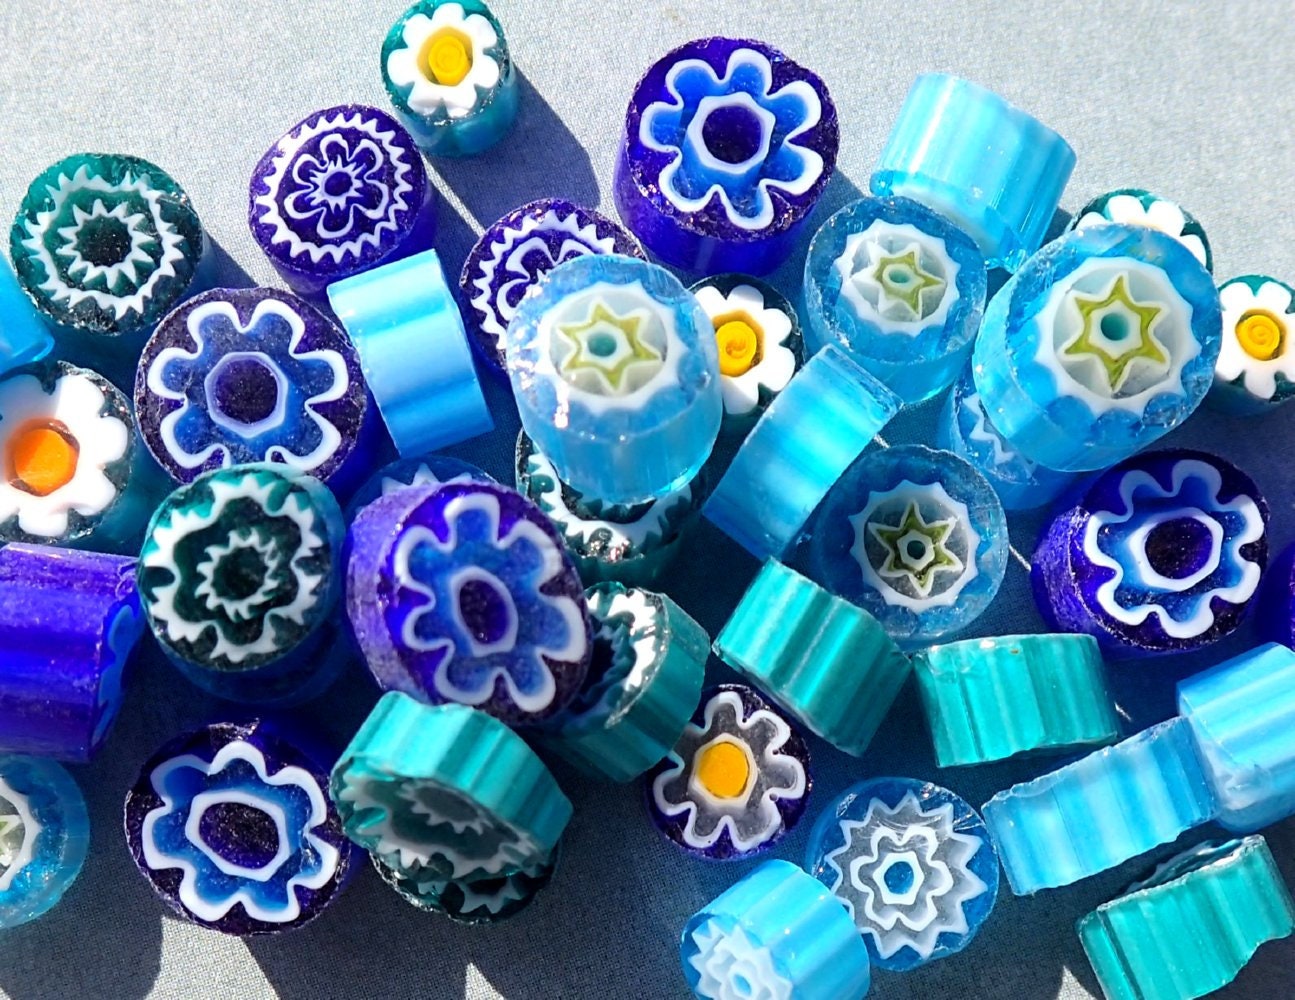 By the Sea Blue Millefiori - 25 grams - Unique Mosaic Glass Tiles - Mix of Different Floral Patterns